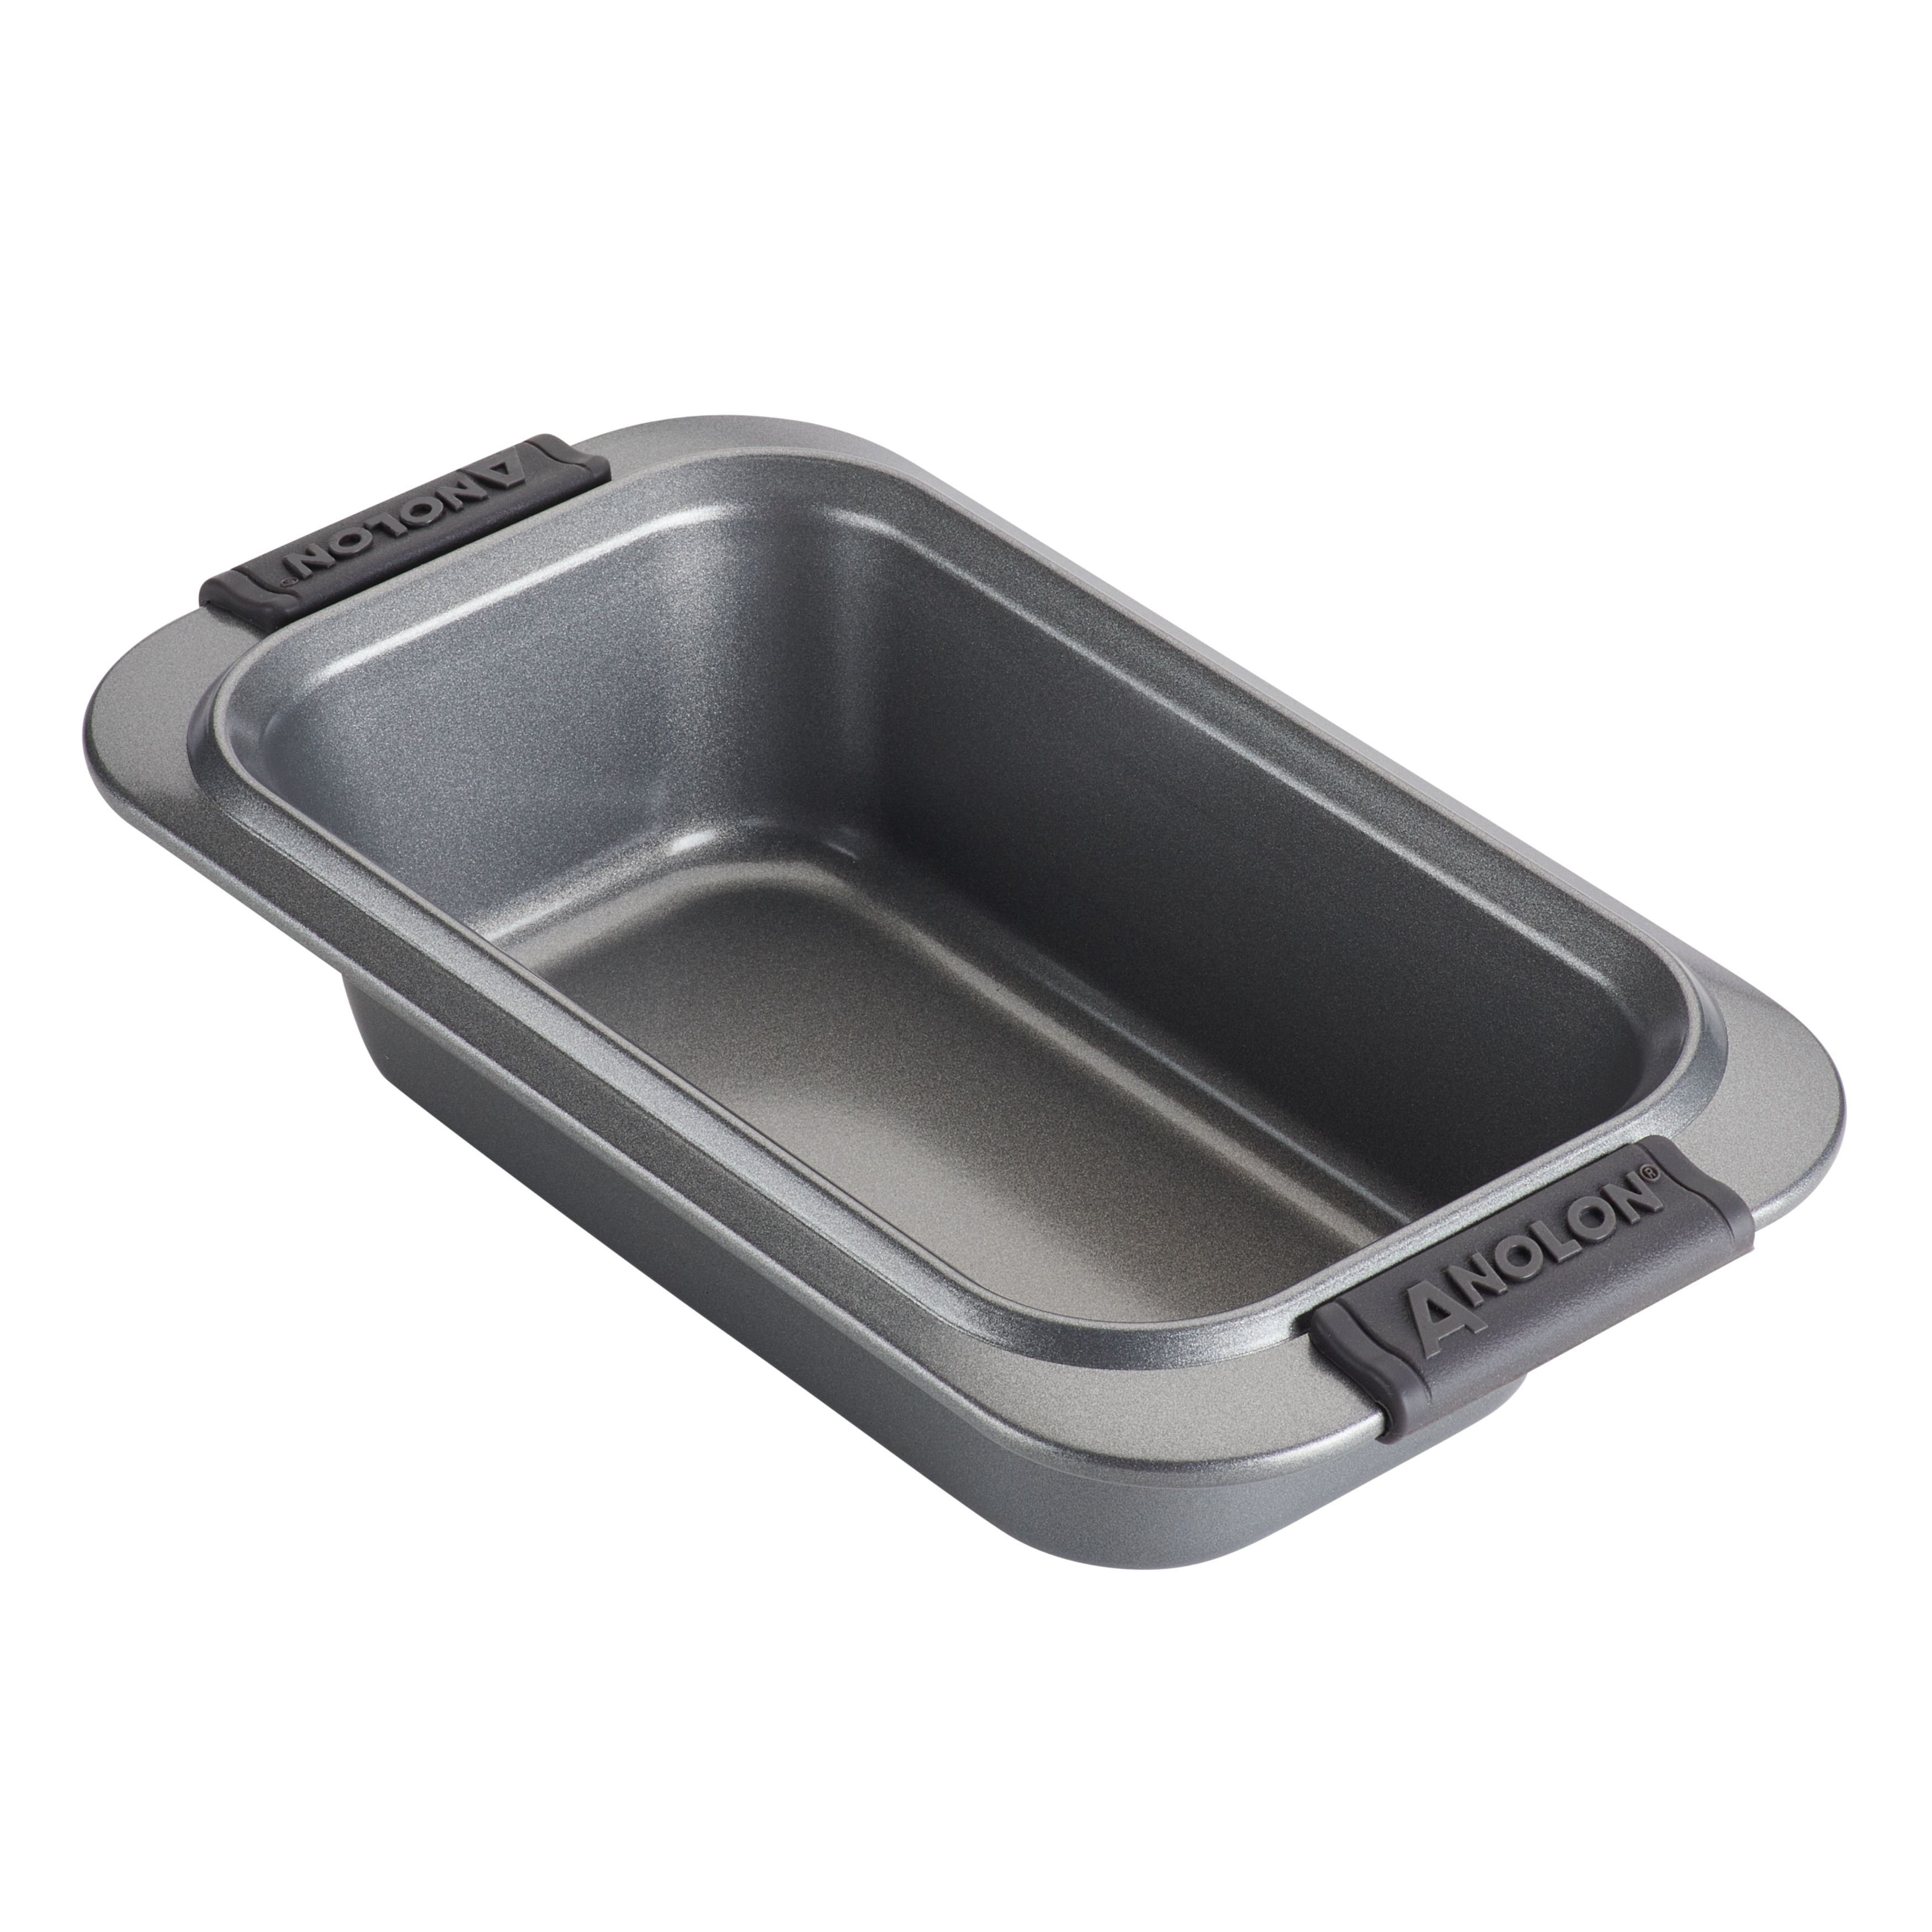 Anolon Advanced Nonstick Bakeware Loaf Pan, 9-Inch x 5-Inch with Silicone  Grips